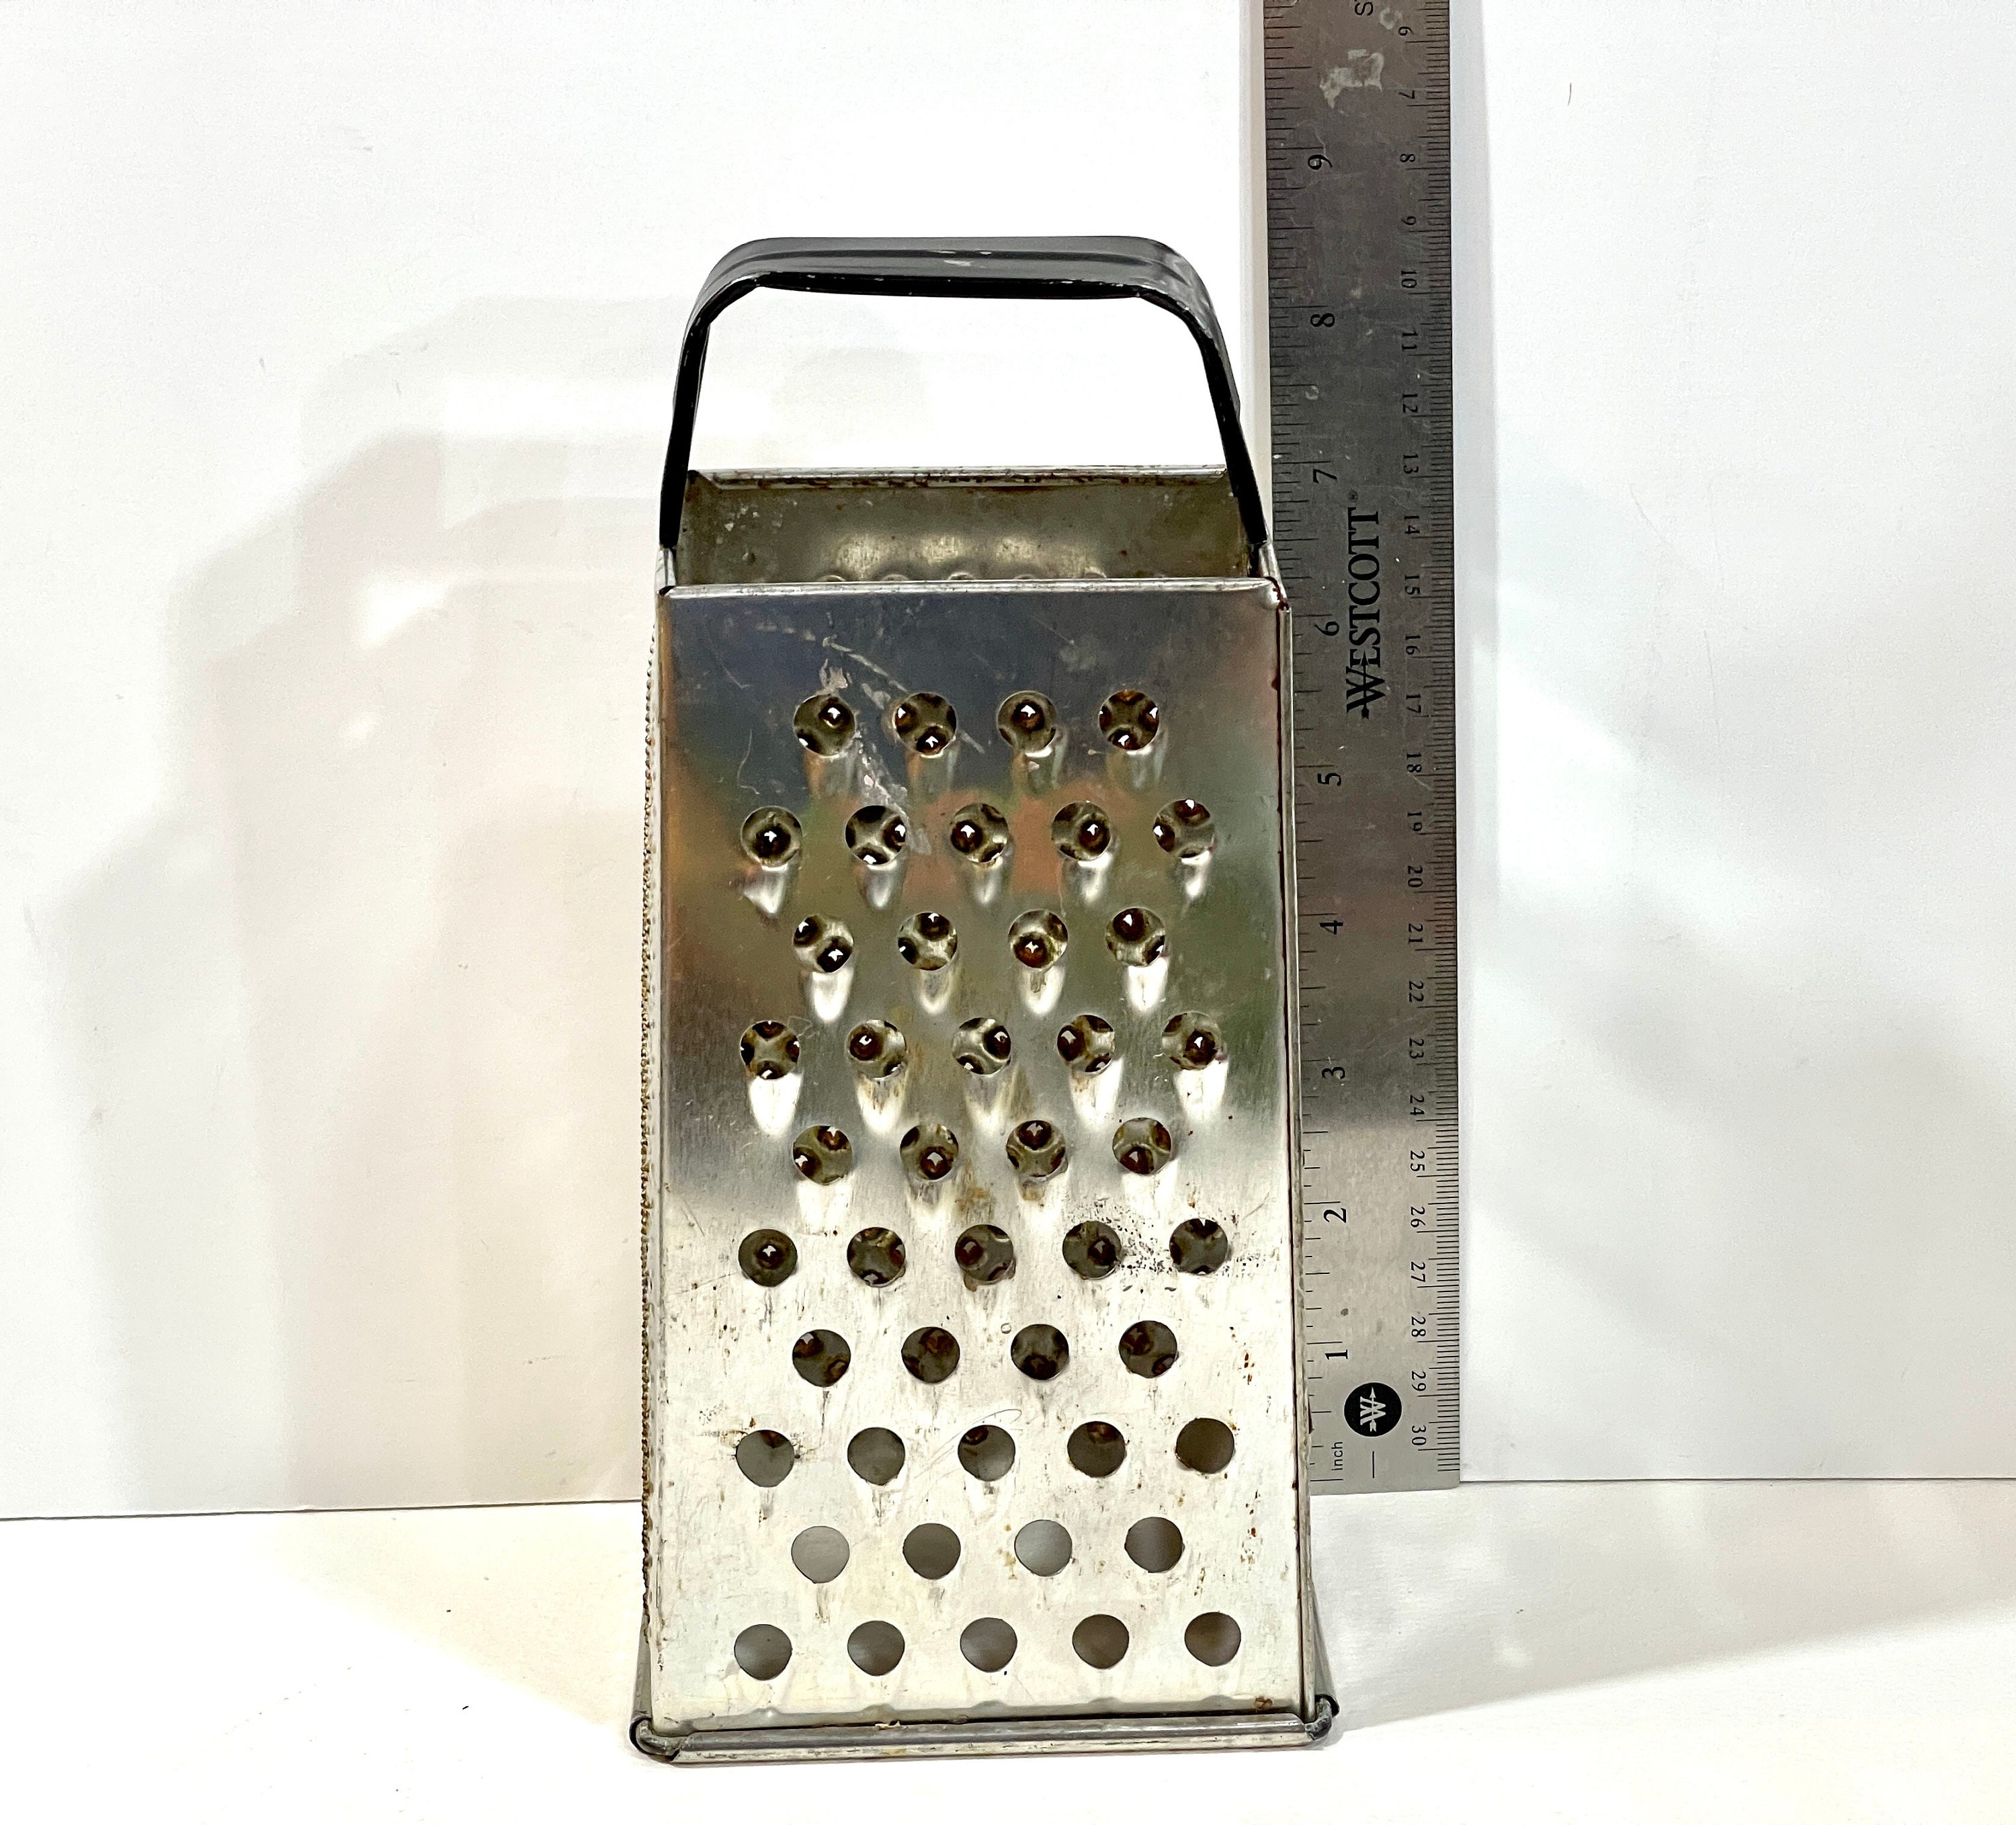 Vintage AN ALL-ROUND GRATER Tin Metal Cheese Grater HUGE 14 Inches!  Primitive